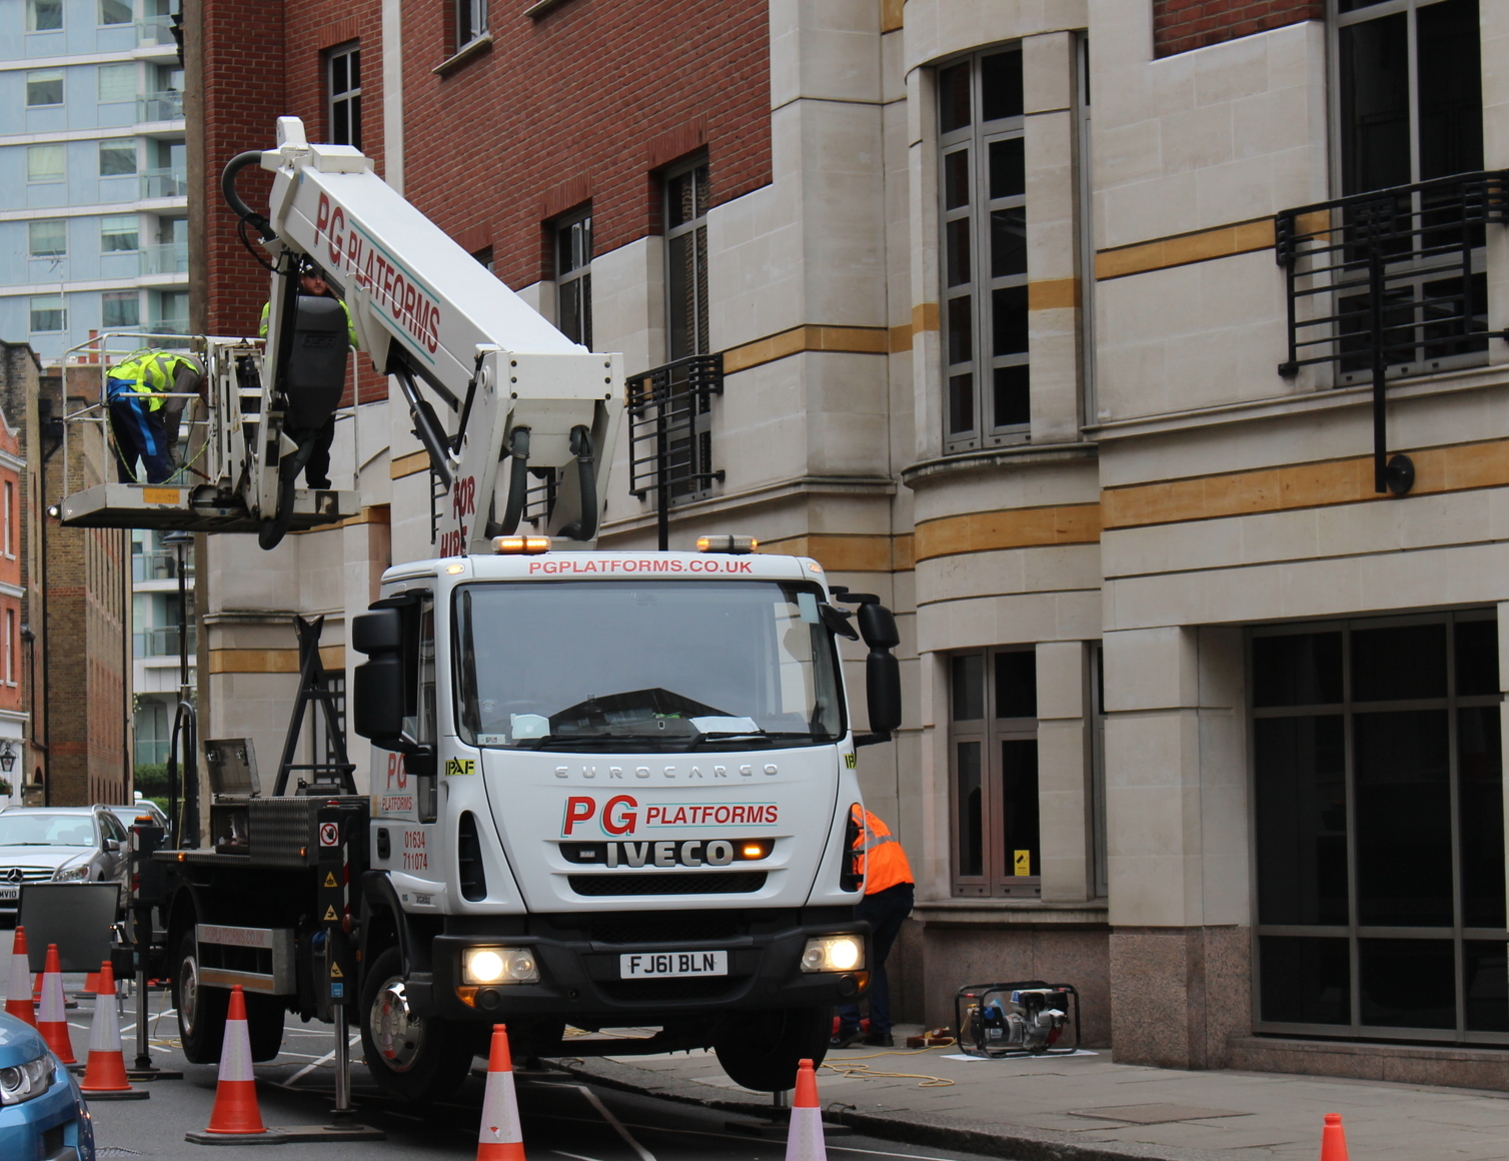 GSR 228TJ vehicle mounted lift hire from PG Platforms